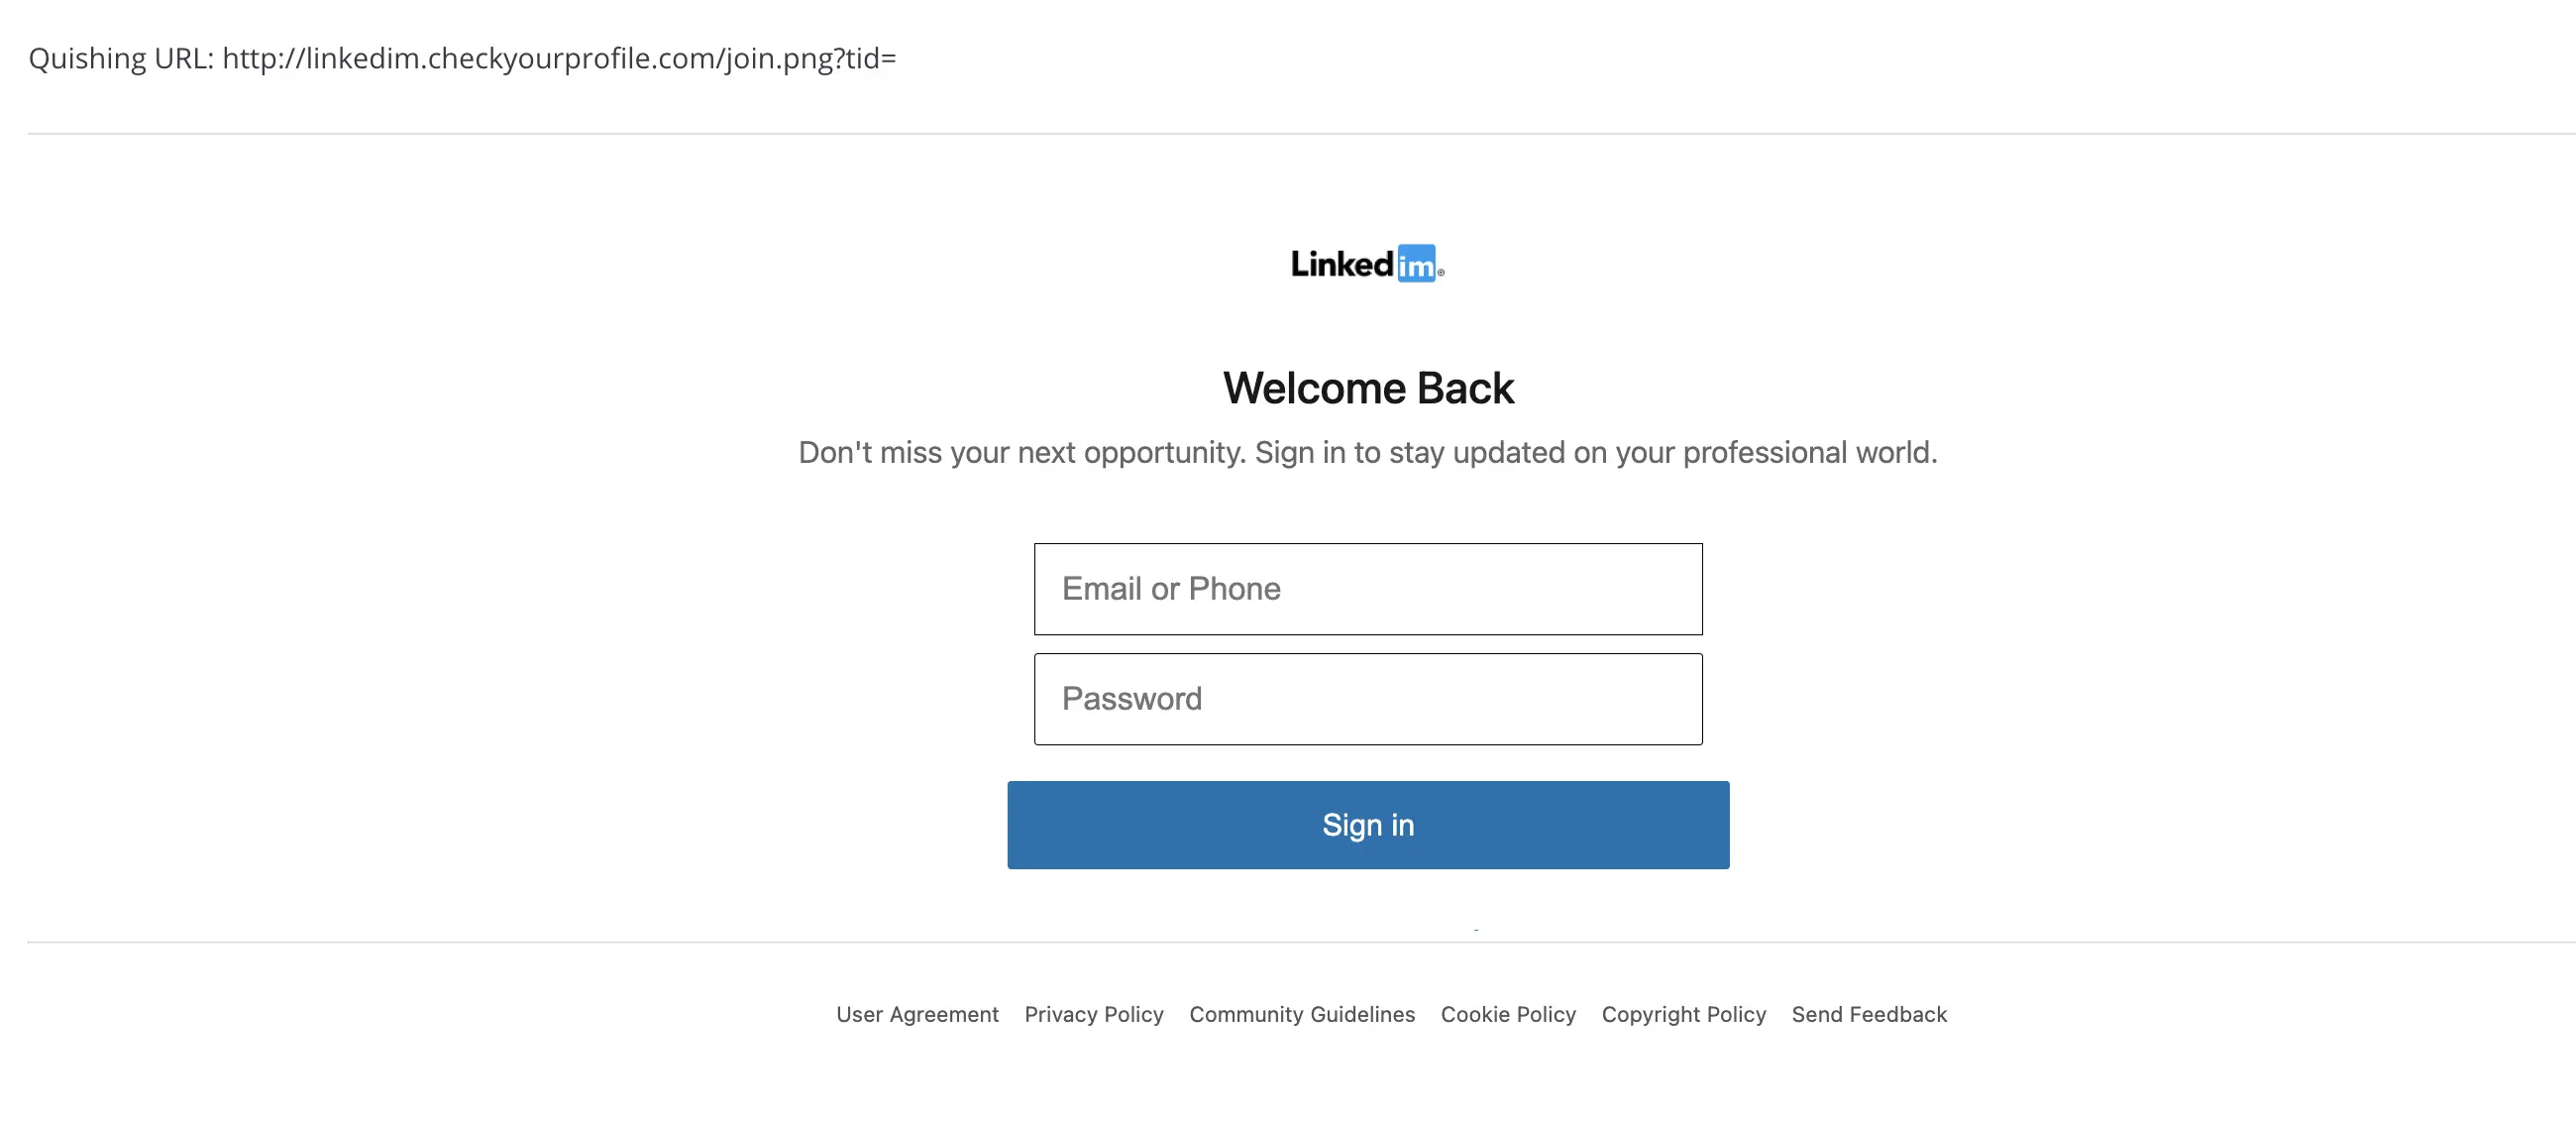 Picture 2. QR Code Phishing Redirect Users to a Fake LinkedIn Page